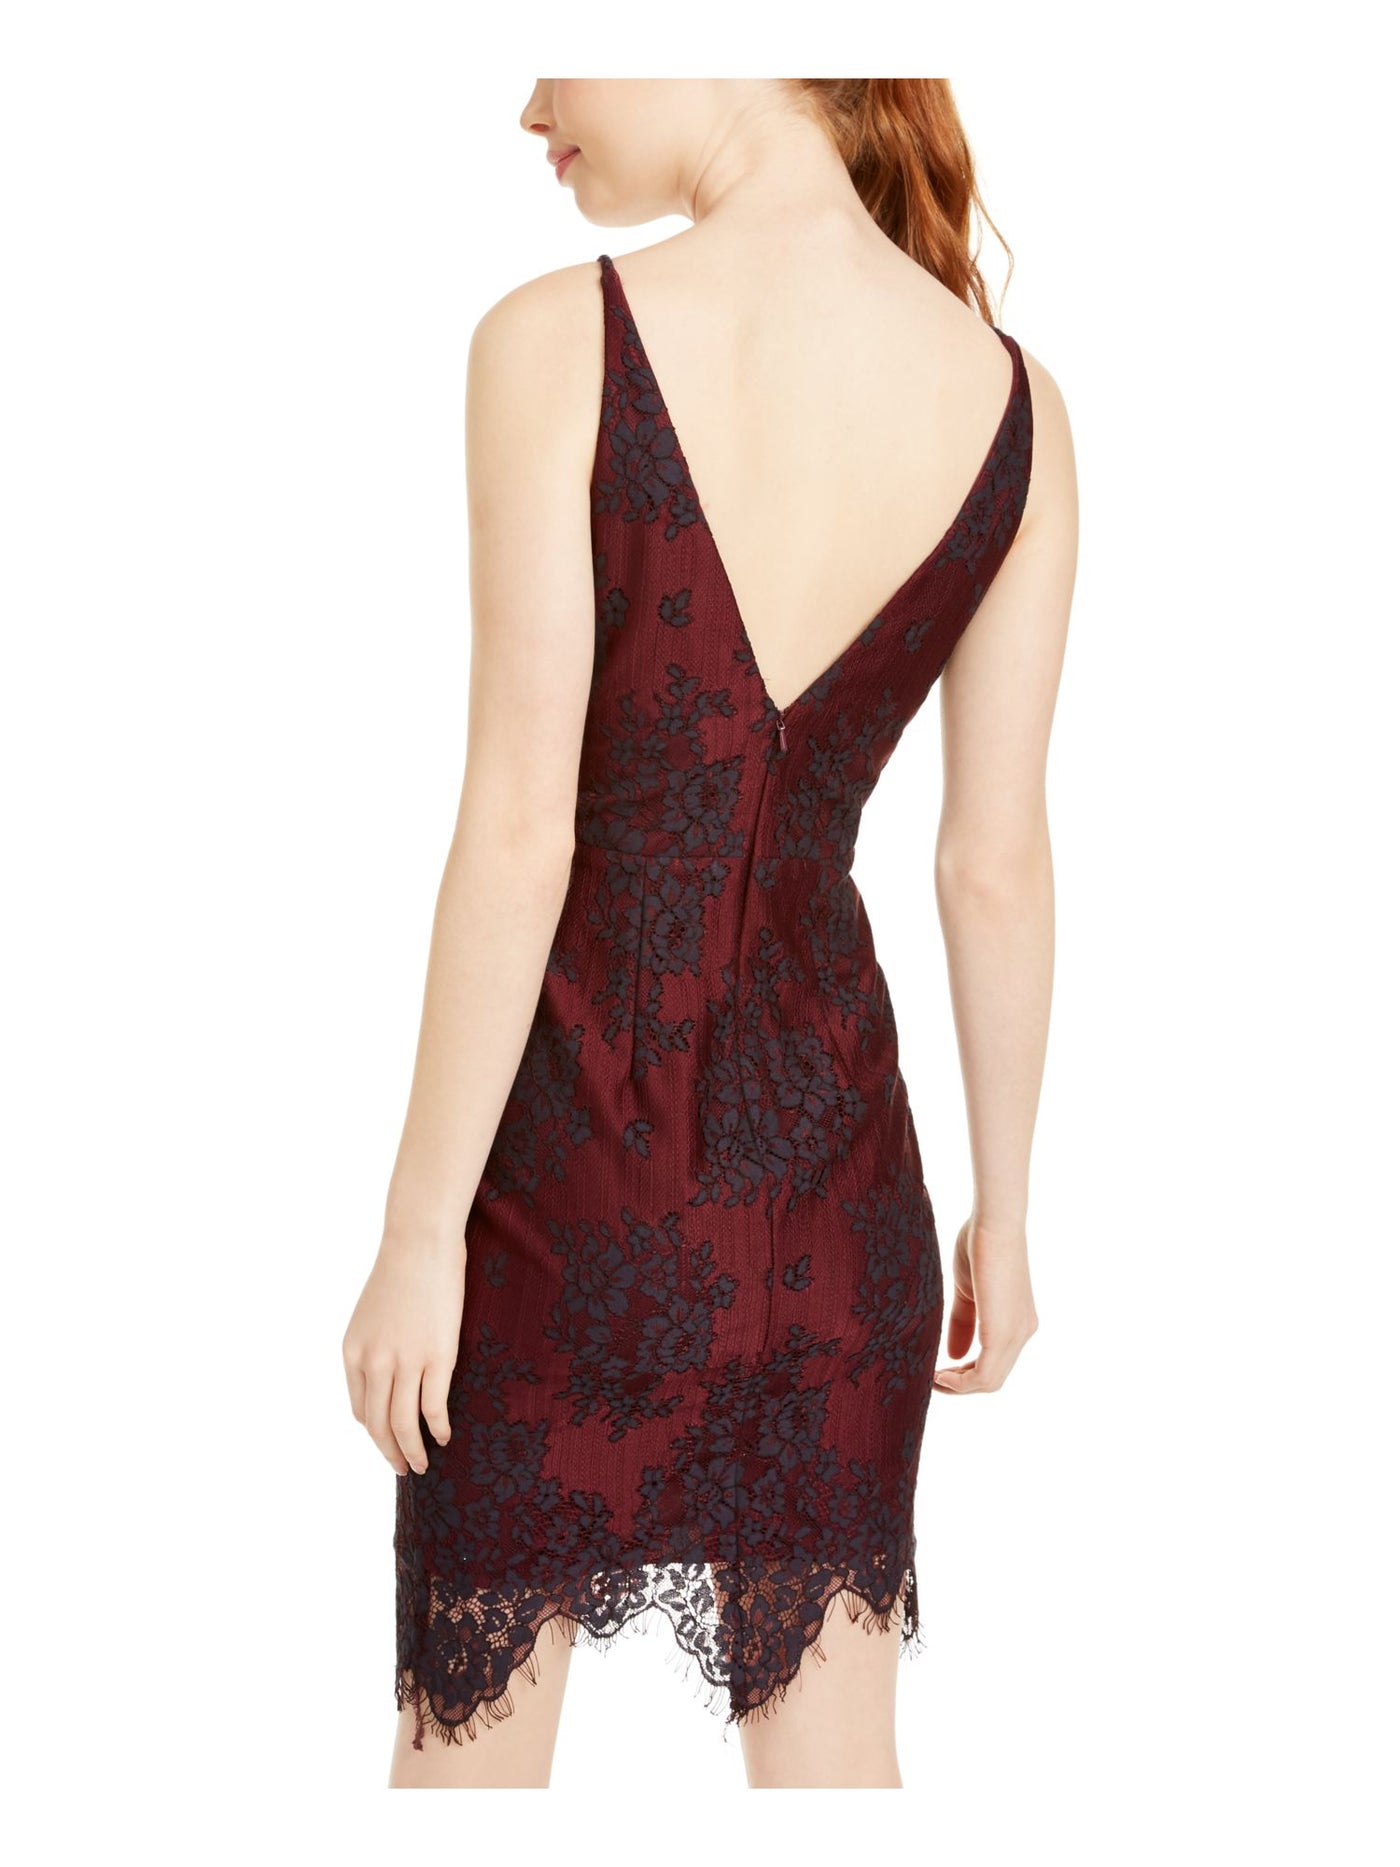 BLONDIE Womens Burgundy Lace Floral Sleeveless V Neck Above The Knee Party Pencil Dress Juniors 3